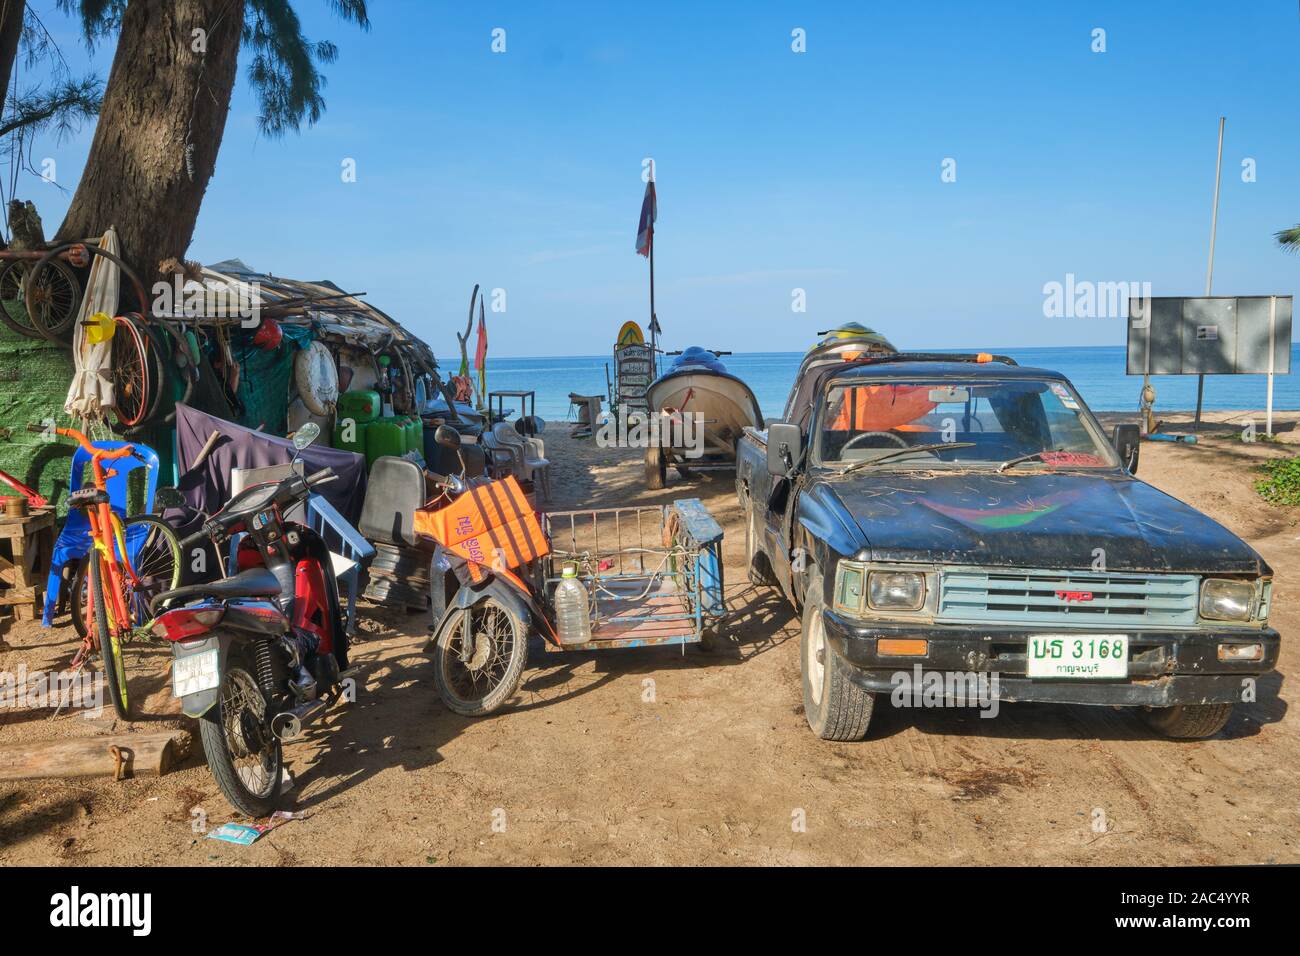 An unkempt part of Bang Tao Beach, Phuket, Thailand, with a beat up pick up truck, old motorcycles and discarded beach furniture Stock Photo